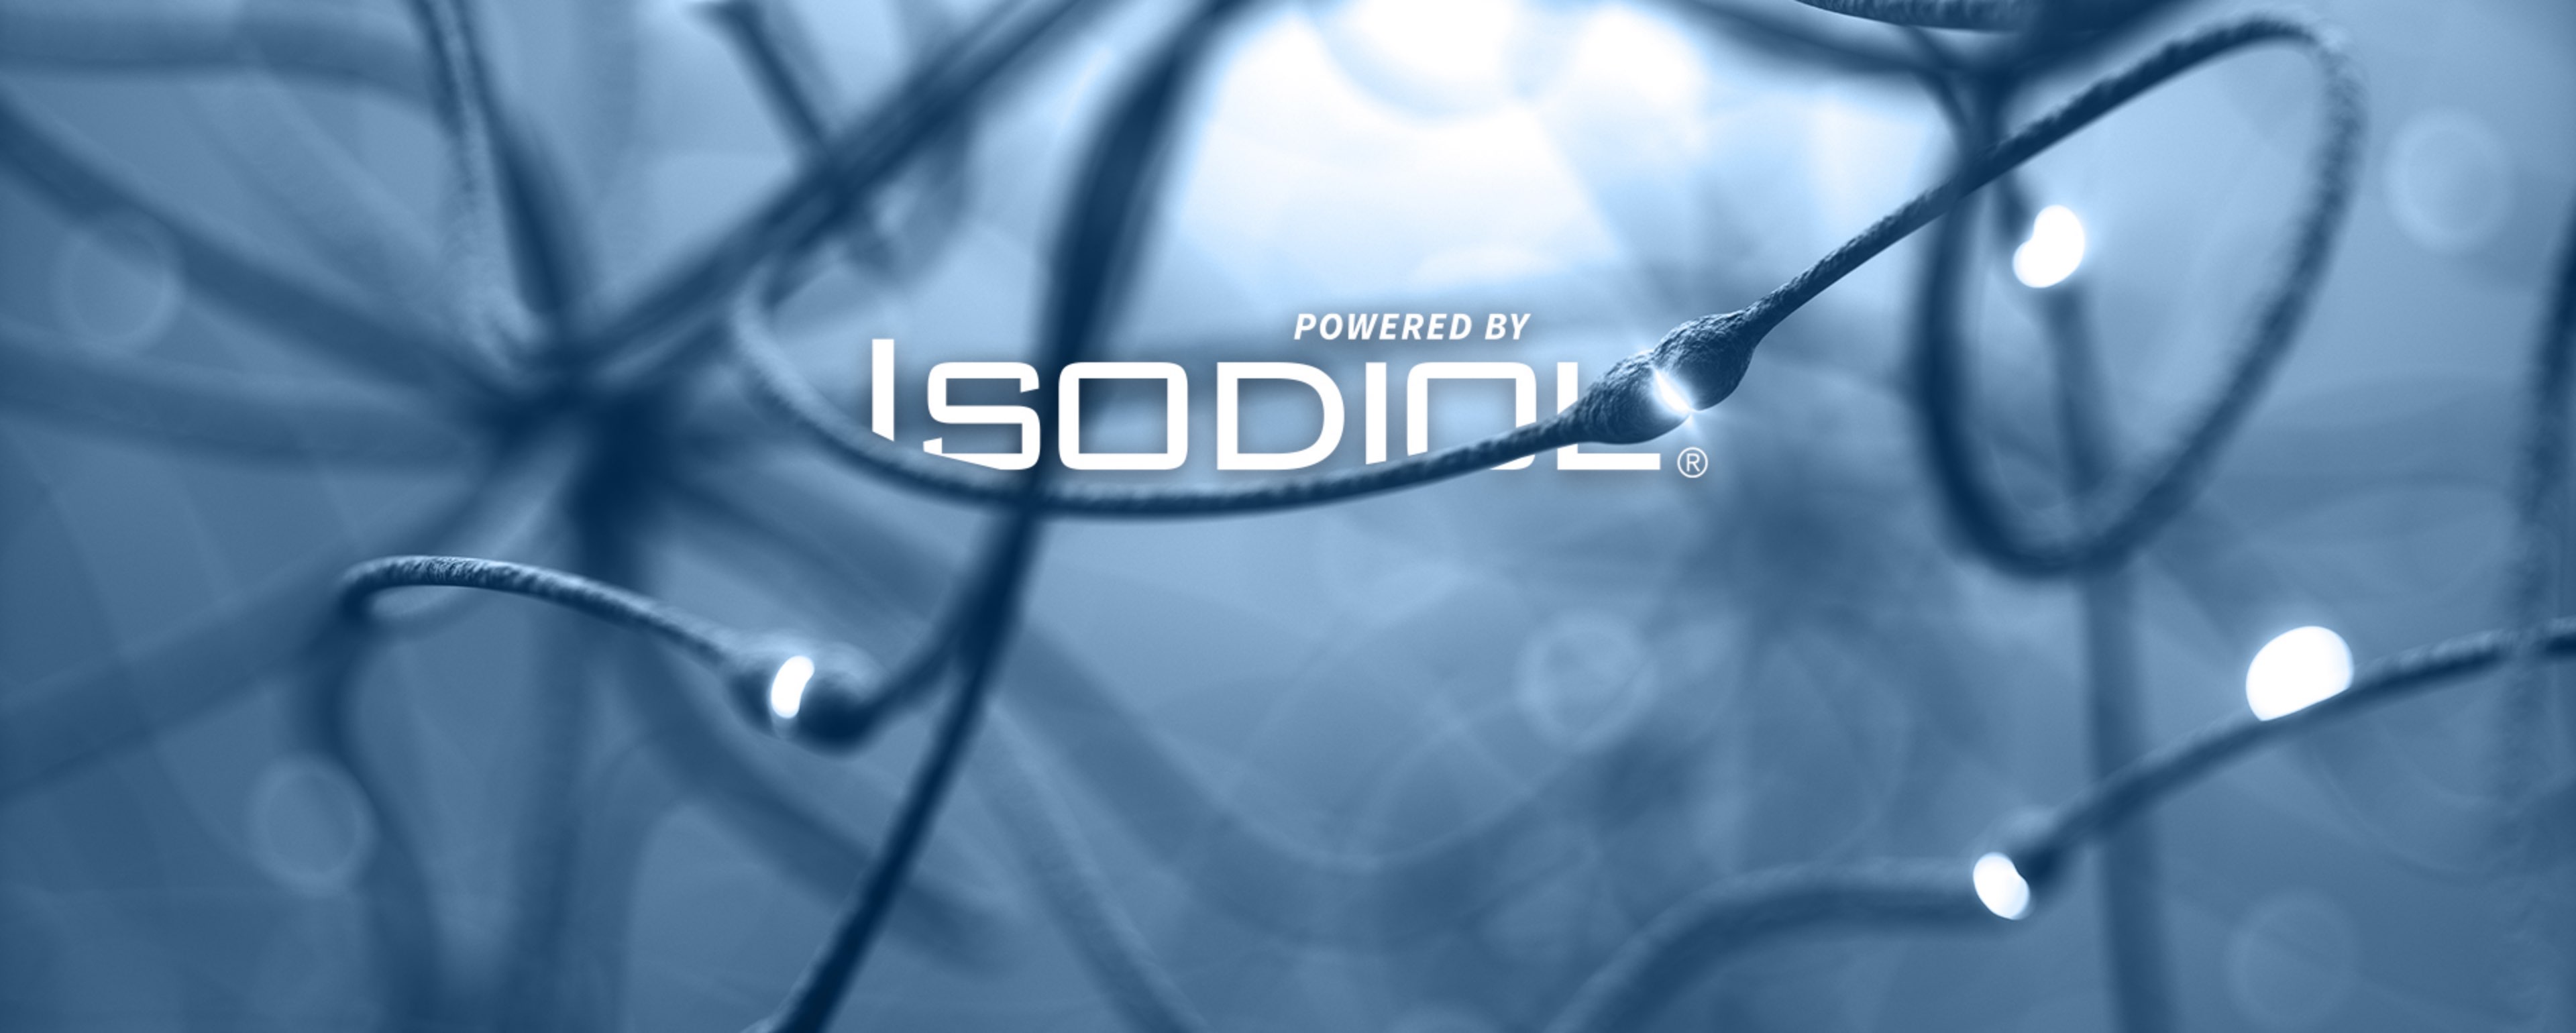 Powered By Isodiol